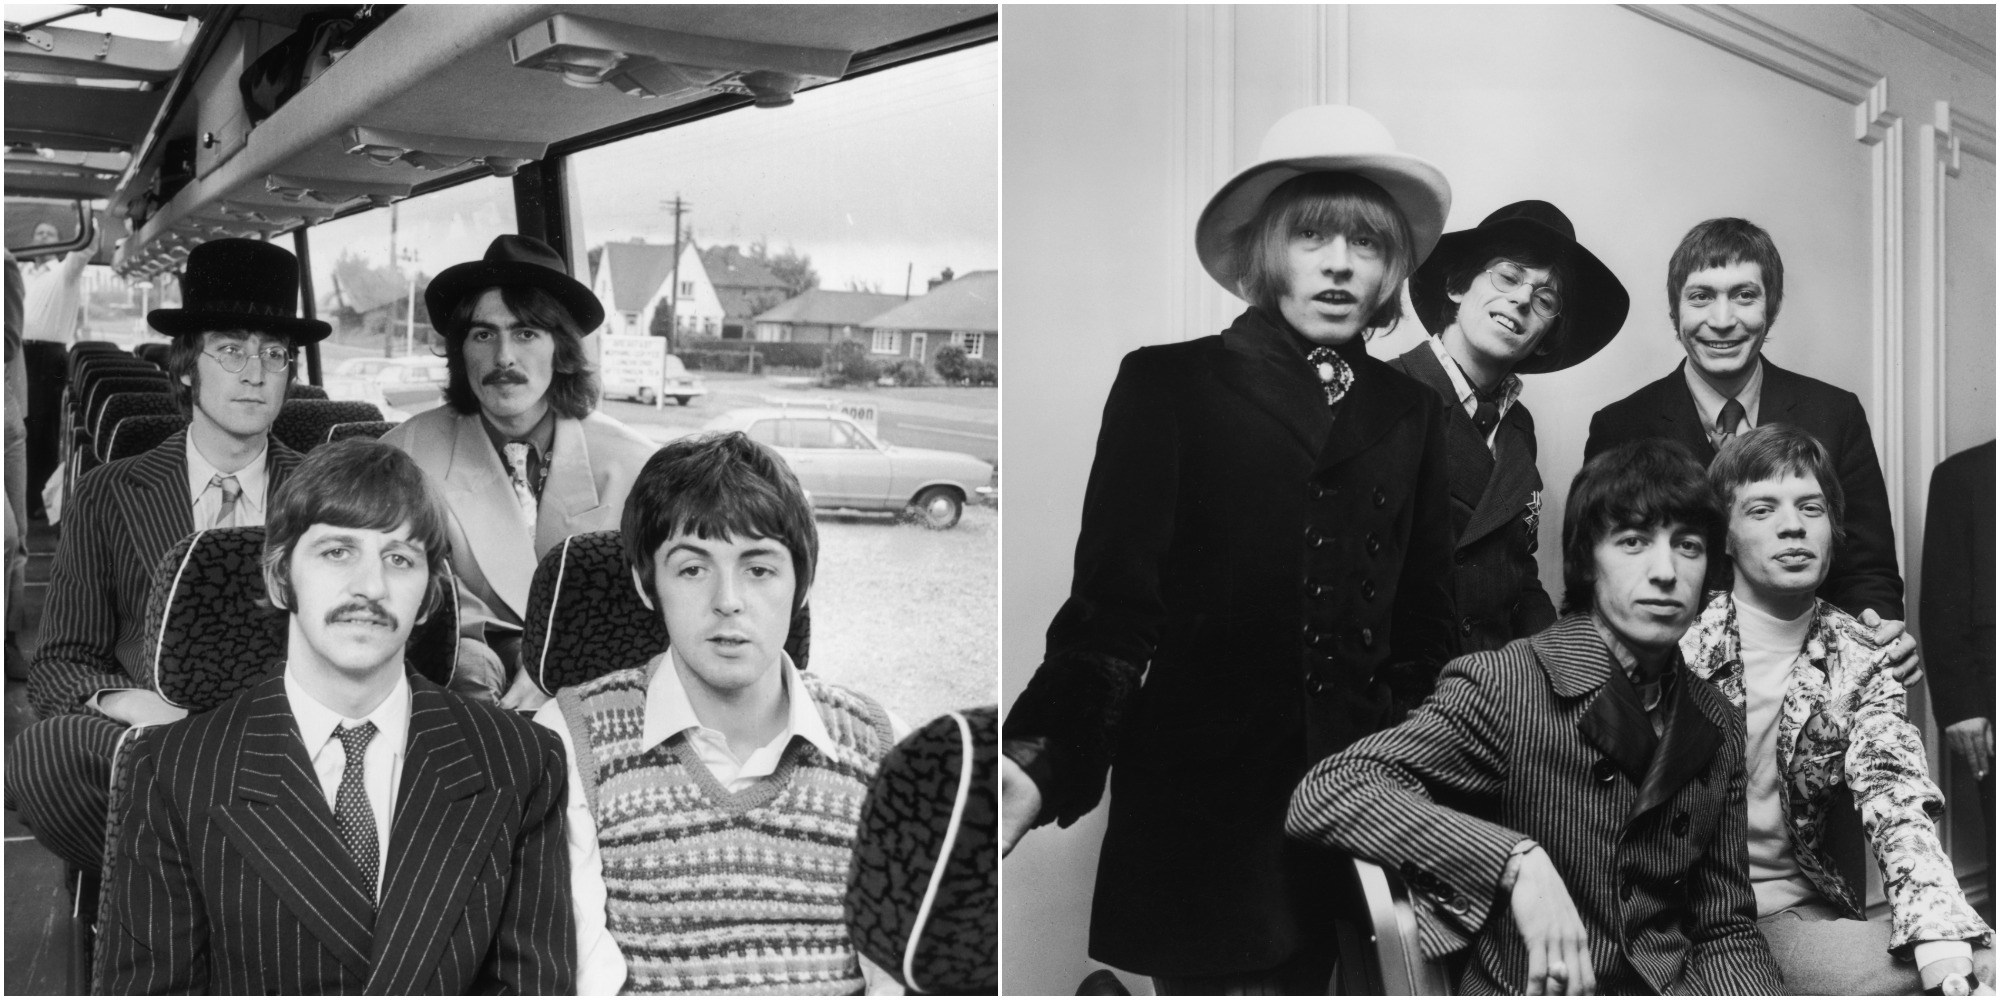 The Beatles and The Rolling Stones in side by side images.